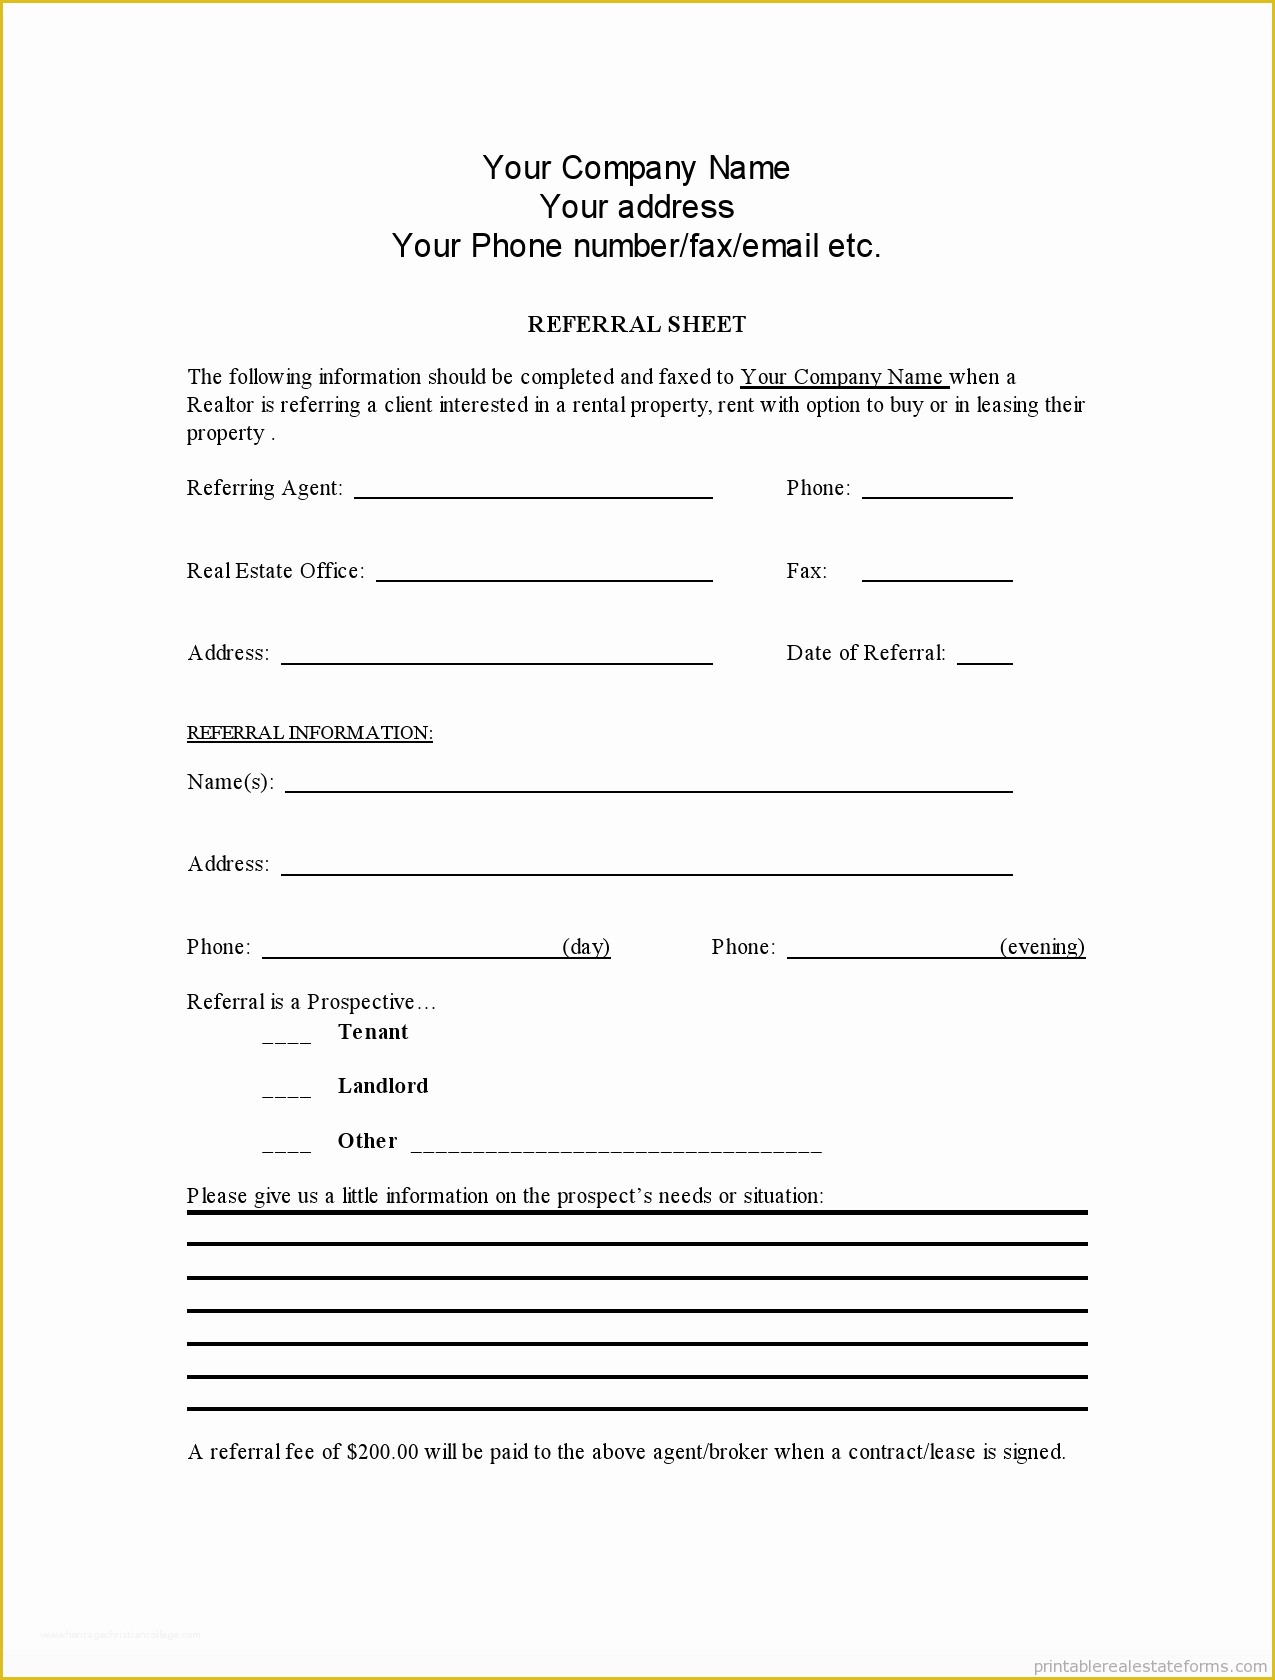 Medical Referral form Template Free Of Free Printable Real Estate Referral form Template Pdf